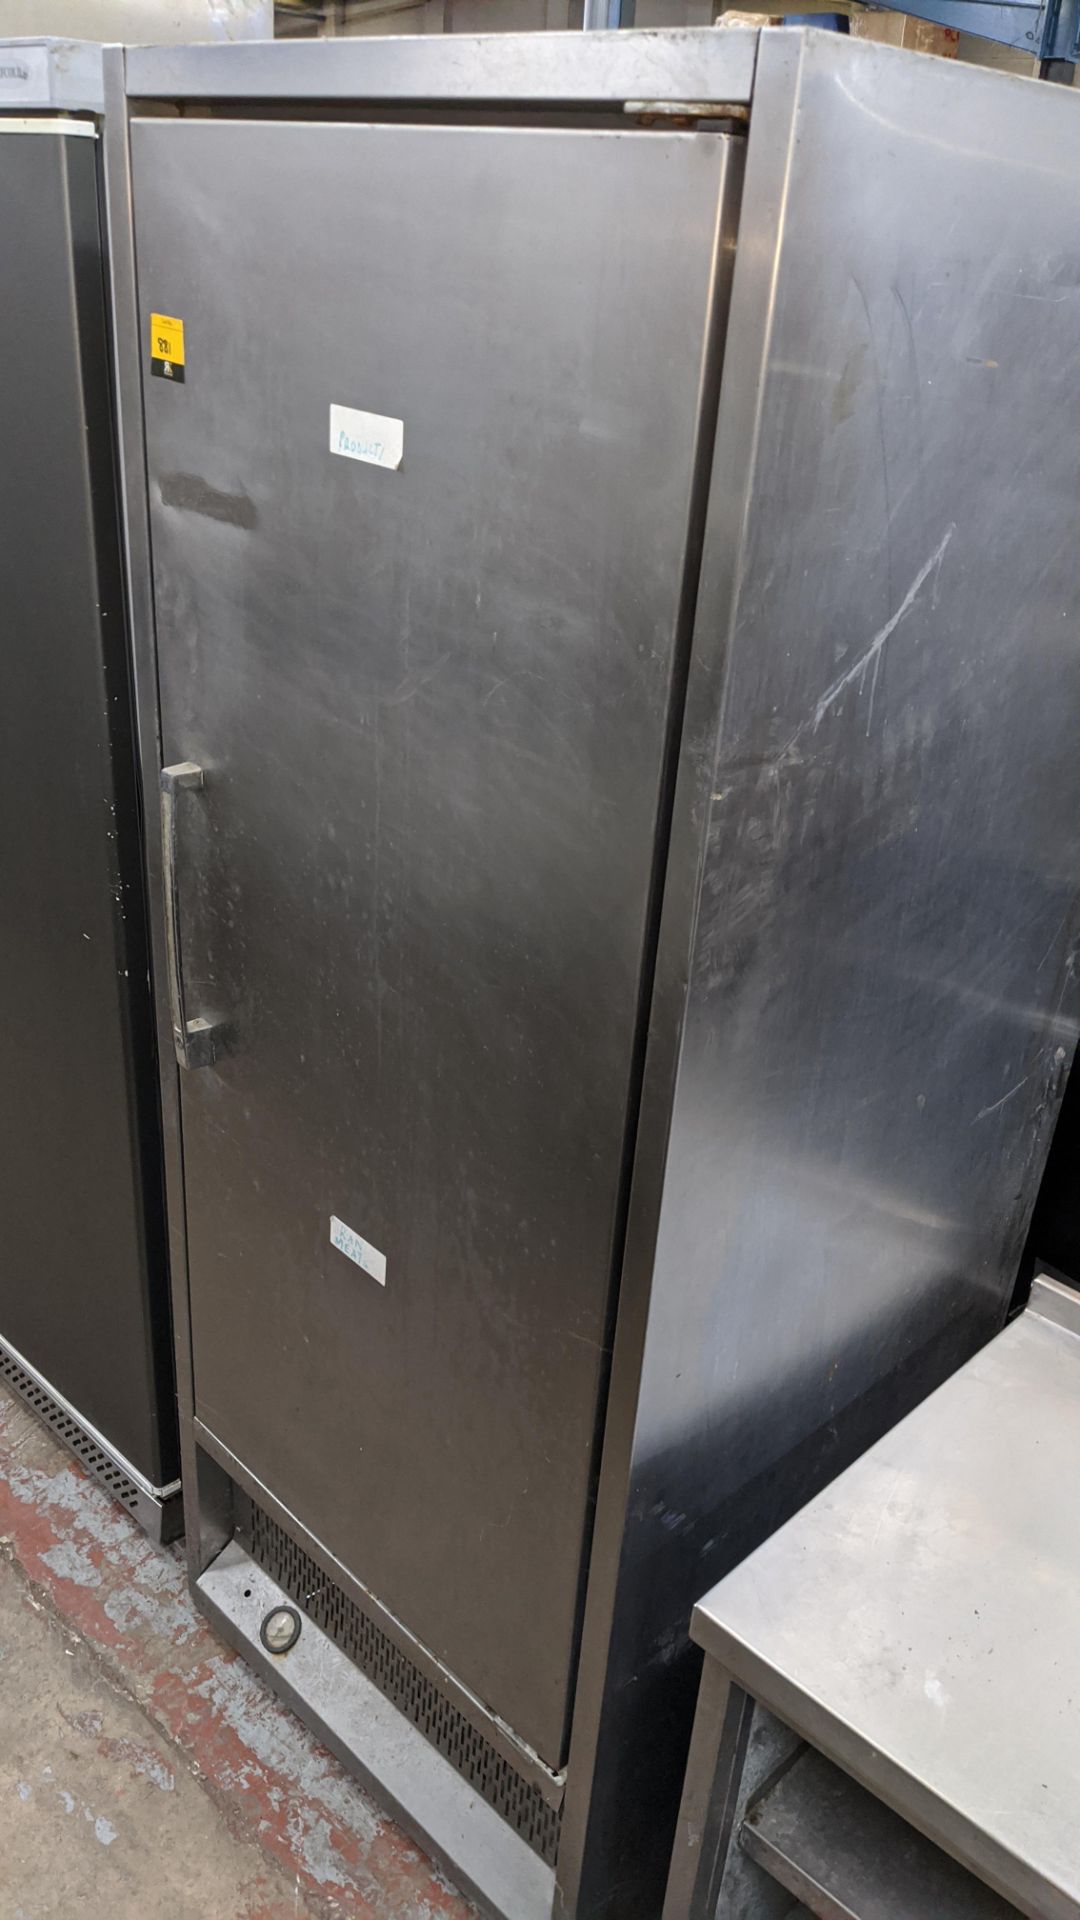 Stainless steel commercial fridge. IMPORTANT: Please remember goods successfully bid upon must be